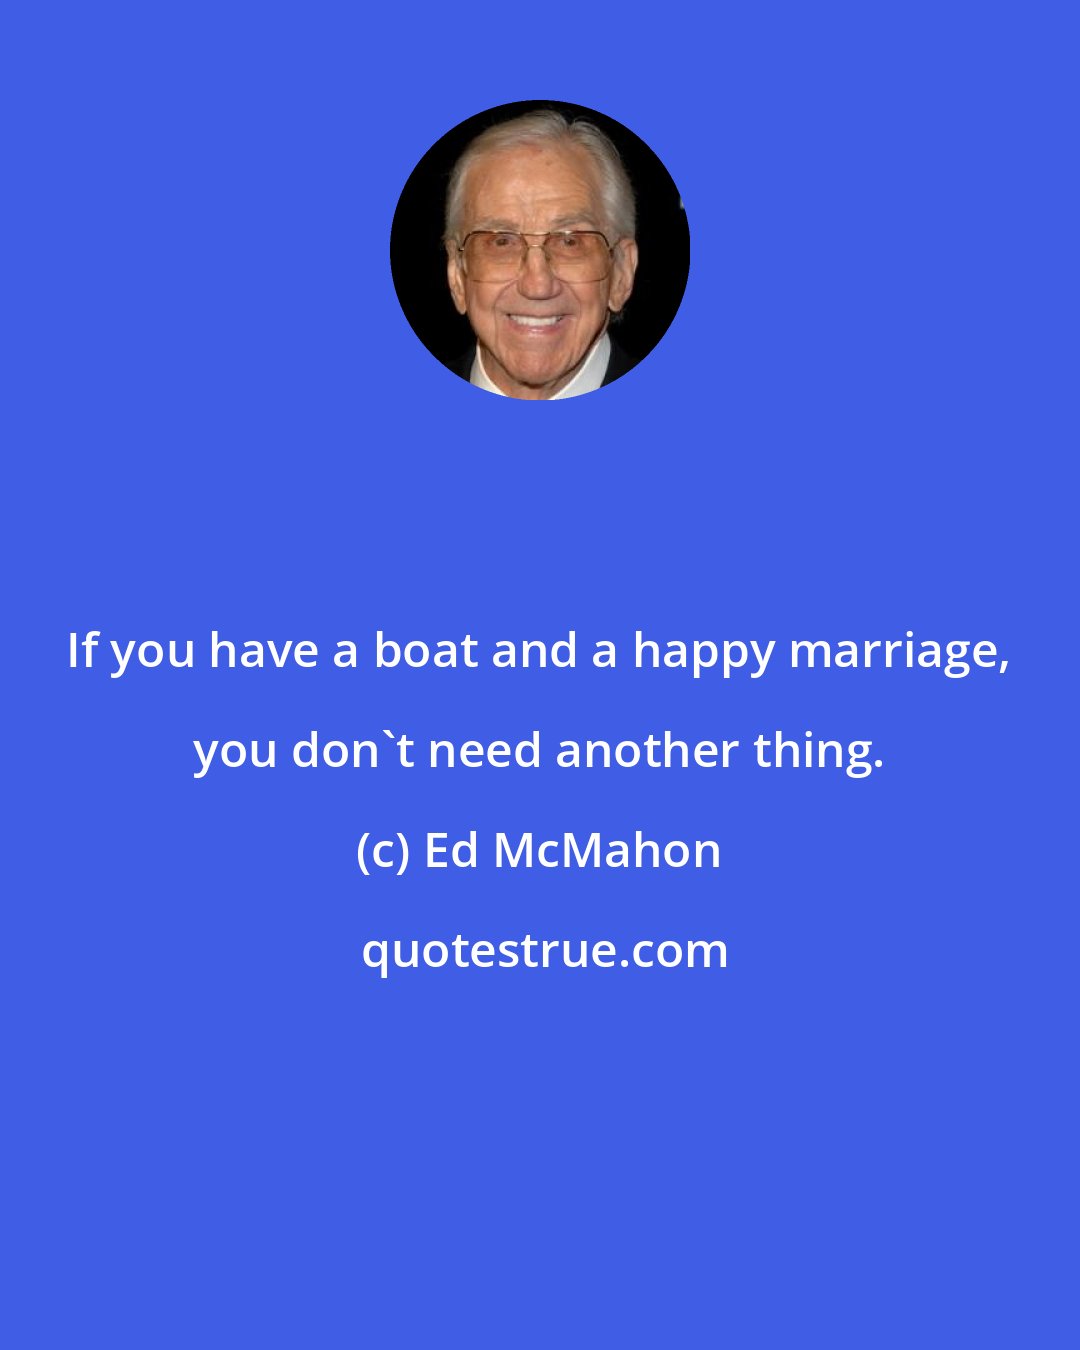 Ed McMahon: If you have a boat and a happy marriage, you don't need another thing.